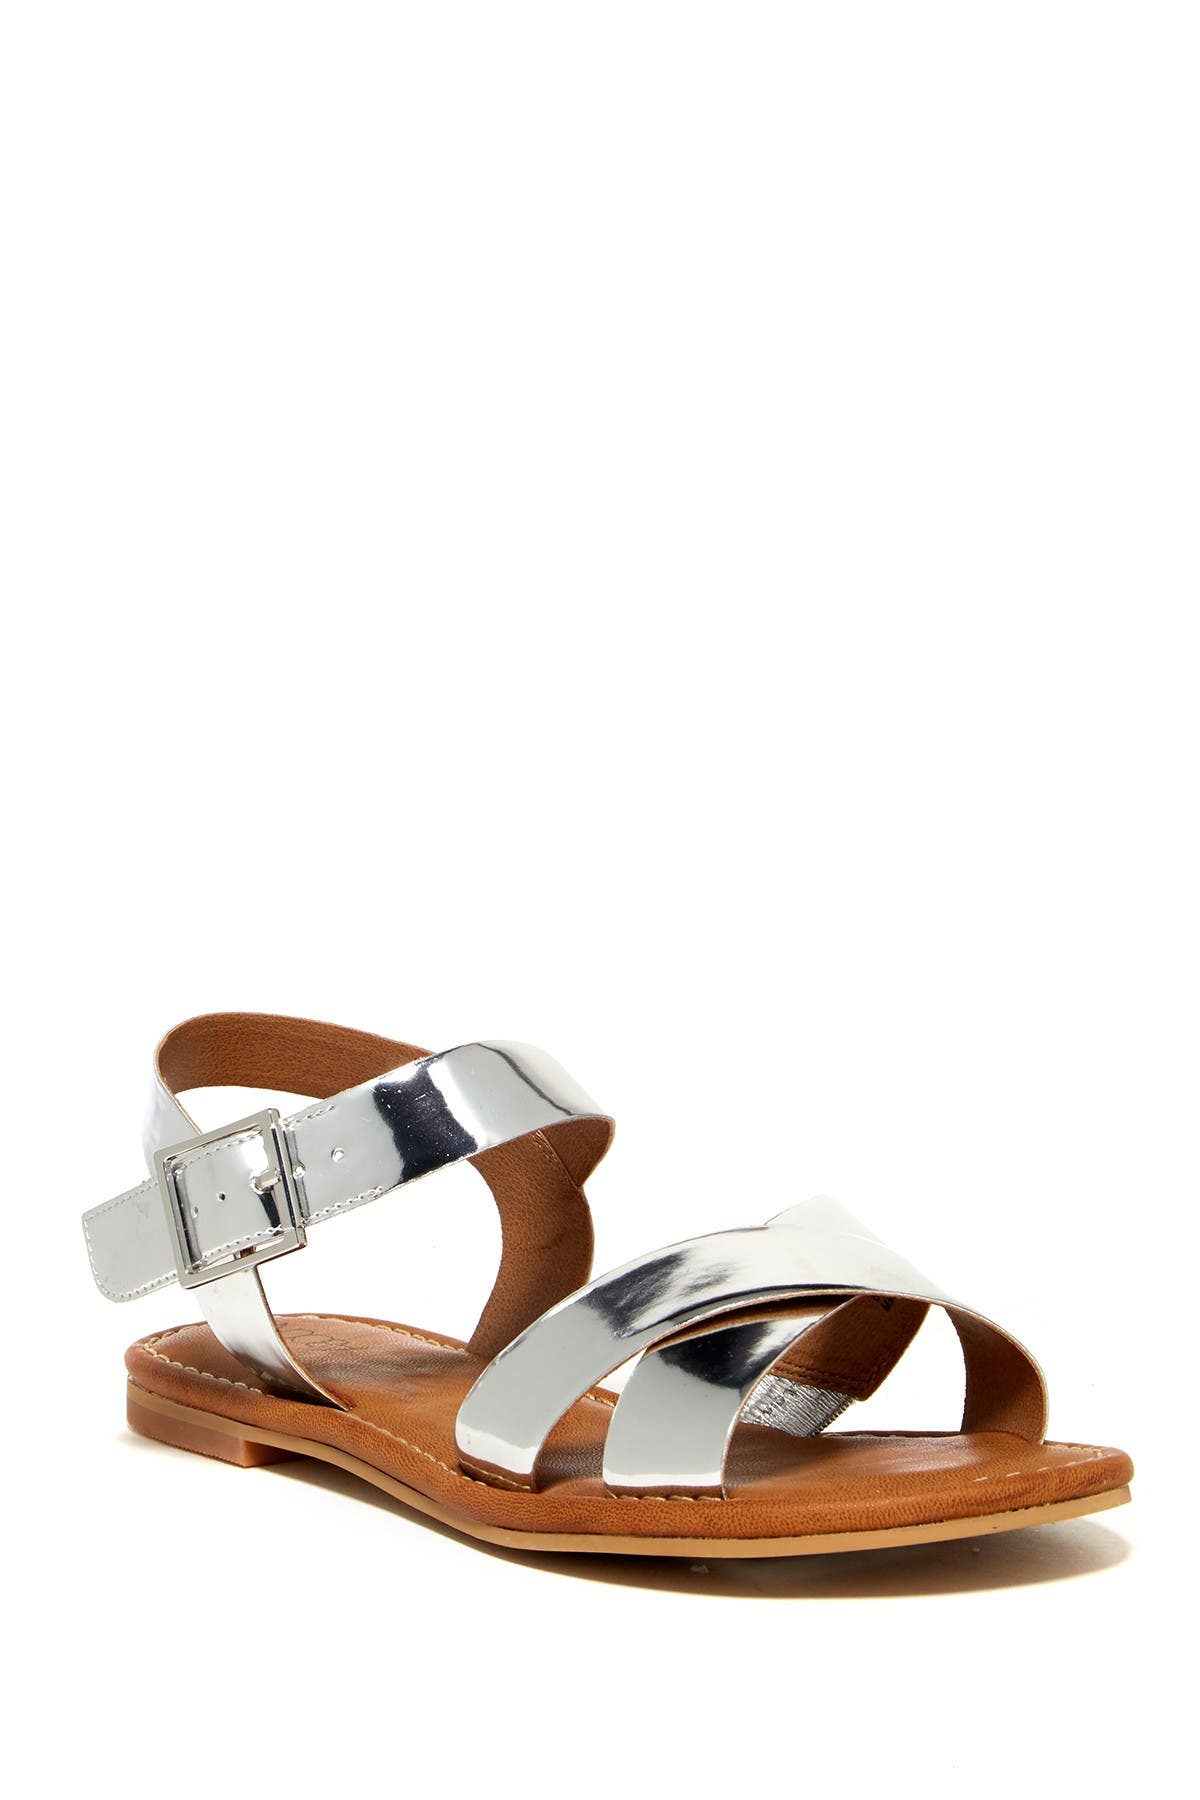 Abound | Meesha Ankle Strap Sandal 